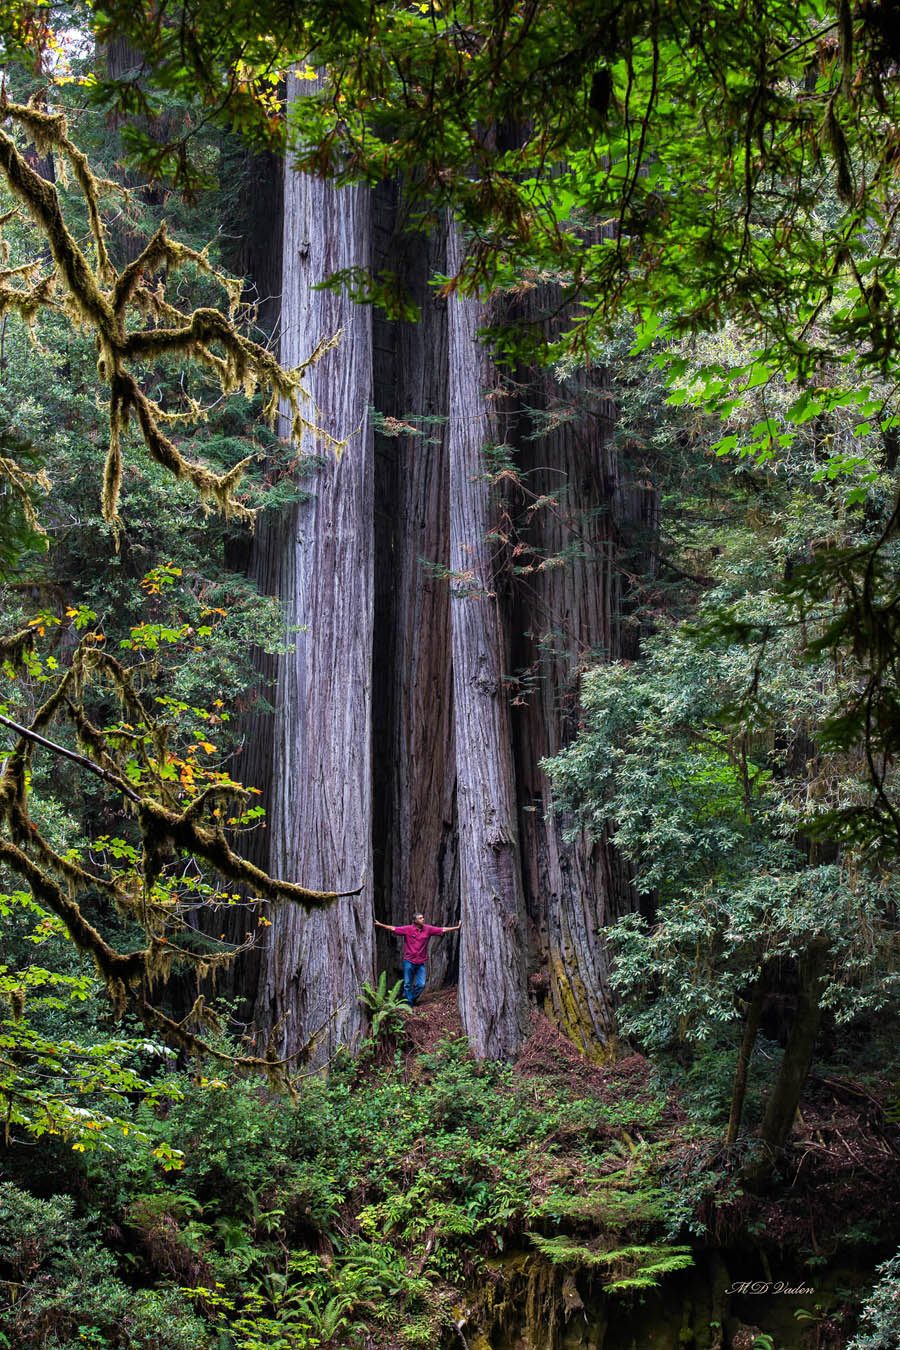 Giant redwood called ZoZos Tree in Redwood National and State Parks